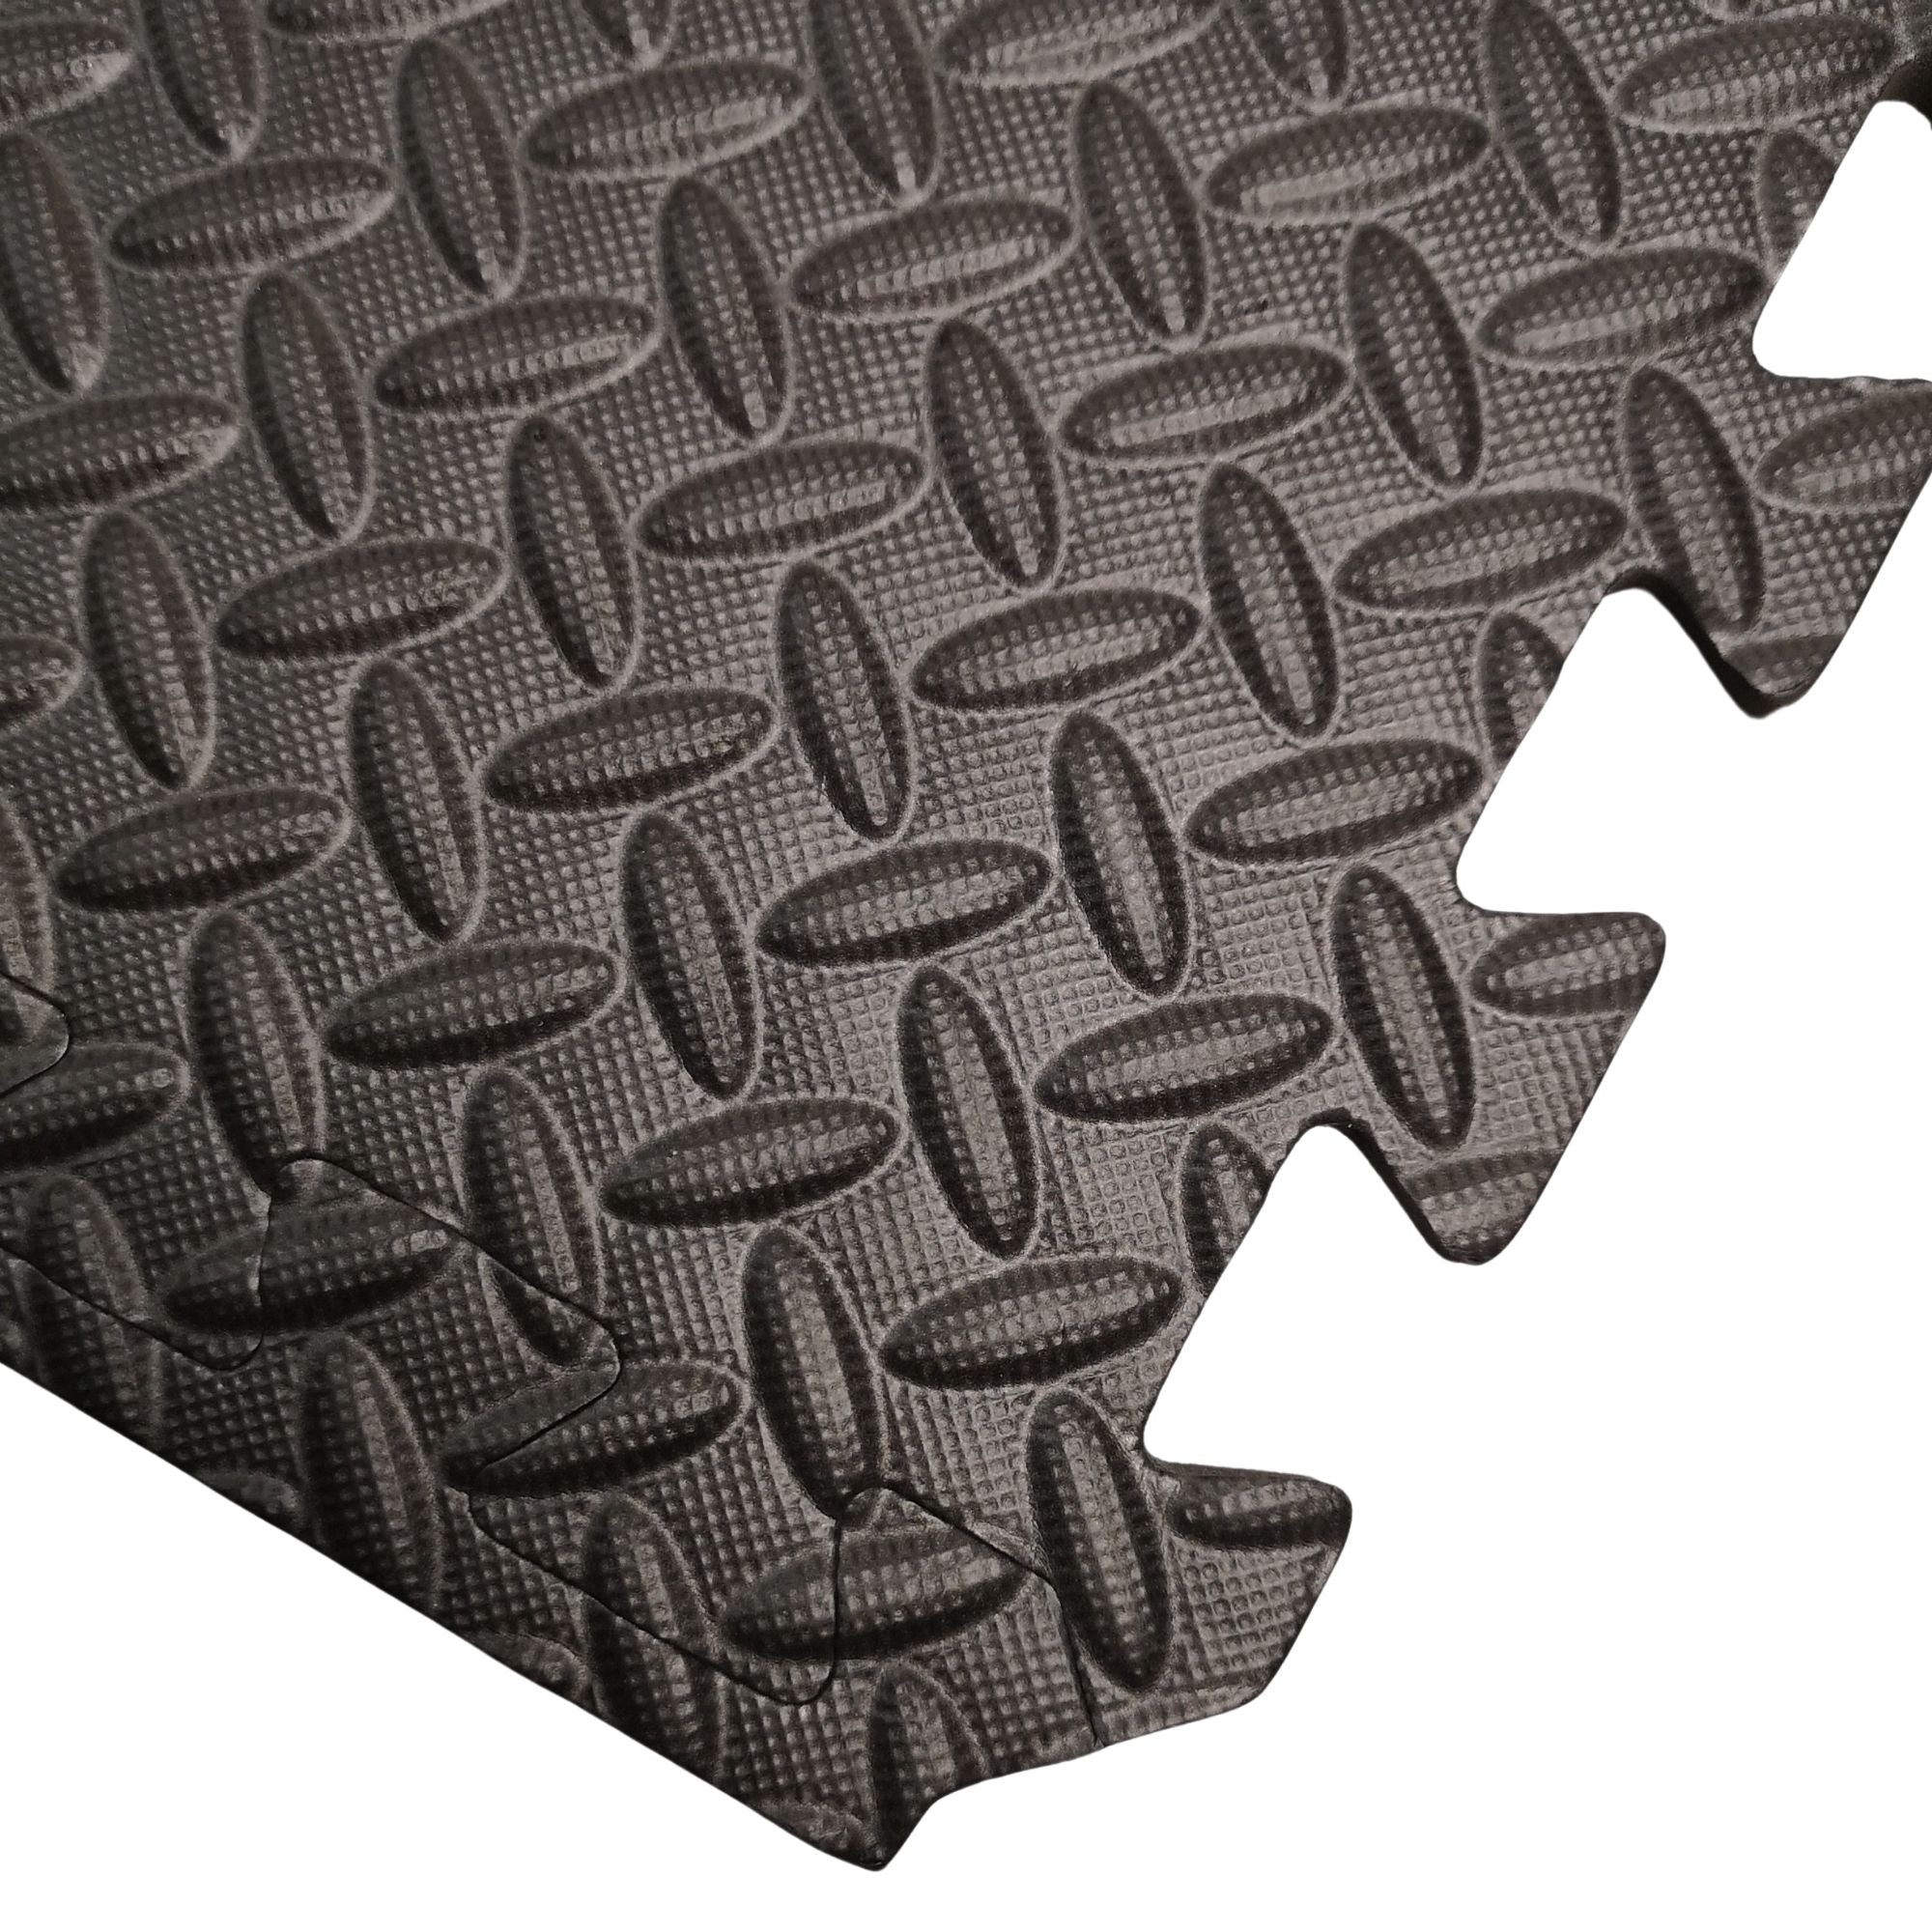 8 Piece EVA Foam Floor Protective Floor Tiles / Mats 60x60cm each For Gyms, Garages, Camping, Kids Play Matting, Hot Tub Flooring Mats And Much More! Set Covers 2.88 sqm (31 sq ft)